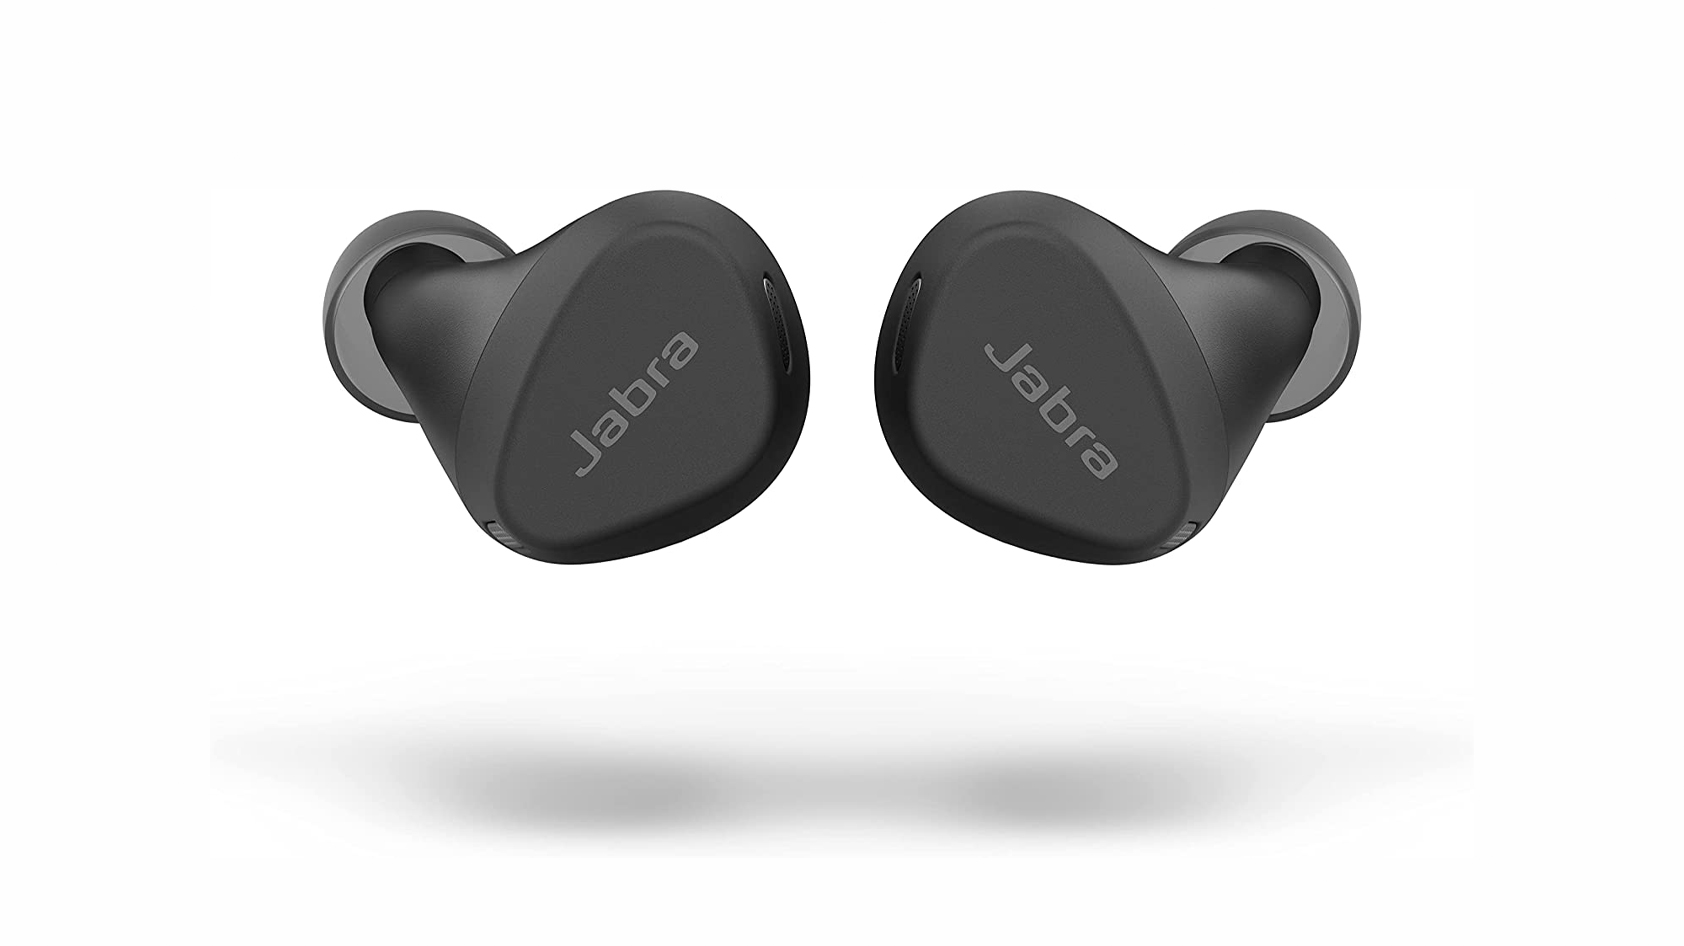 Jabra Elite 5 could be the BEST Jabra Earbuds! 😲 Review — Aaron x